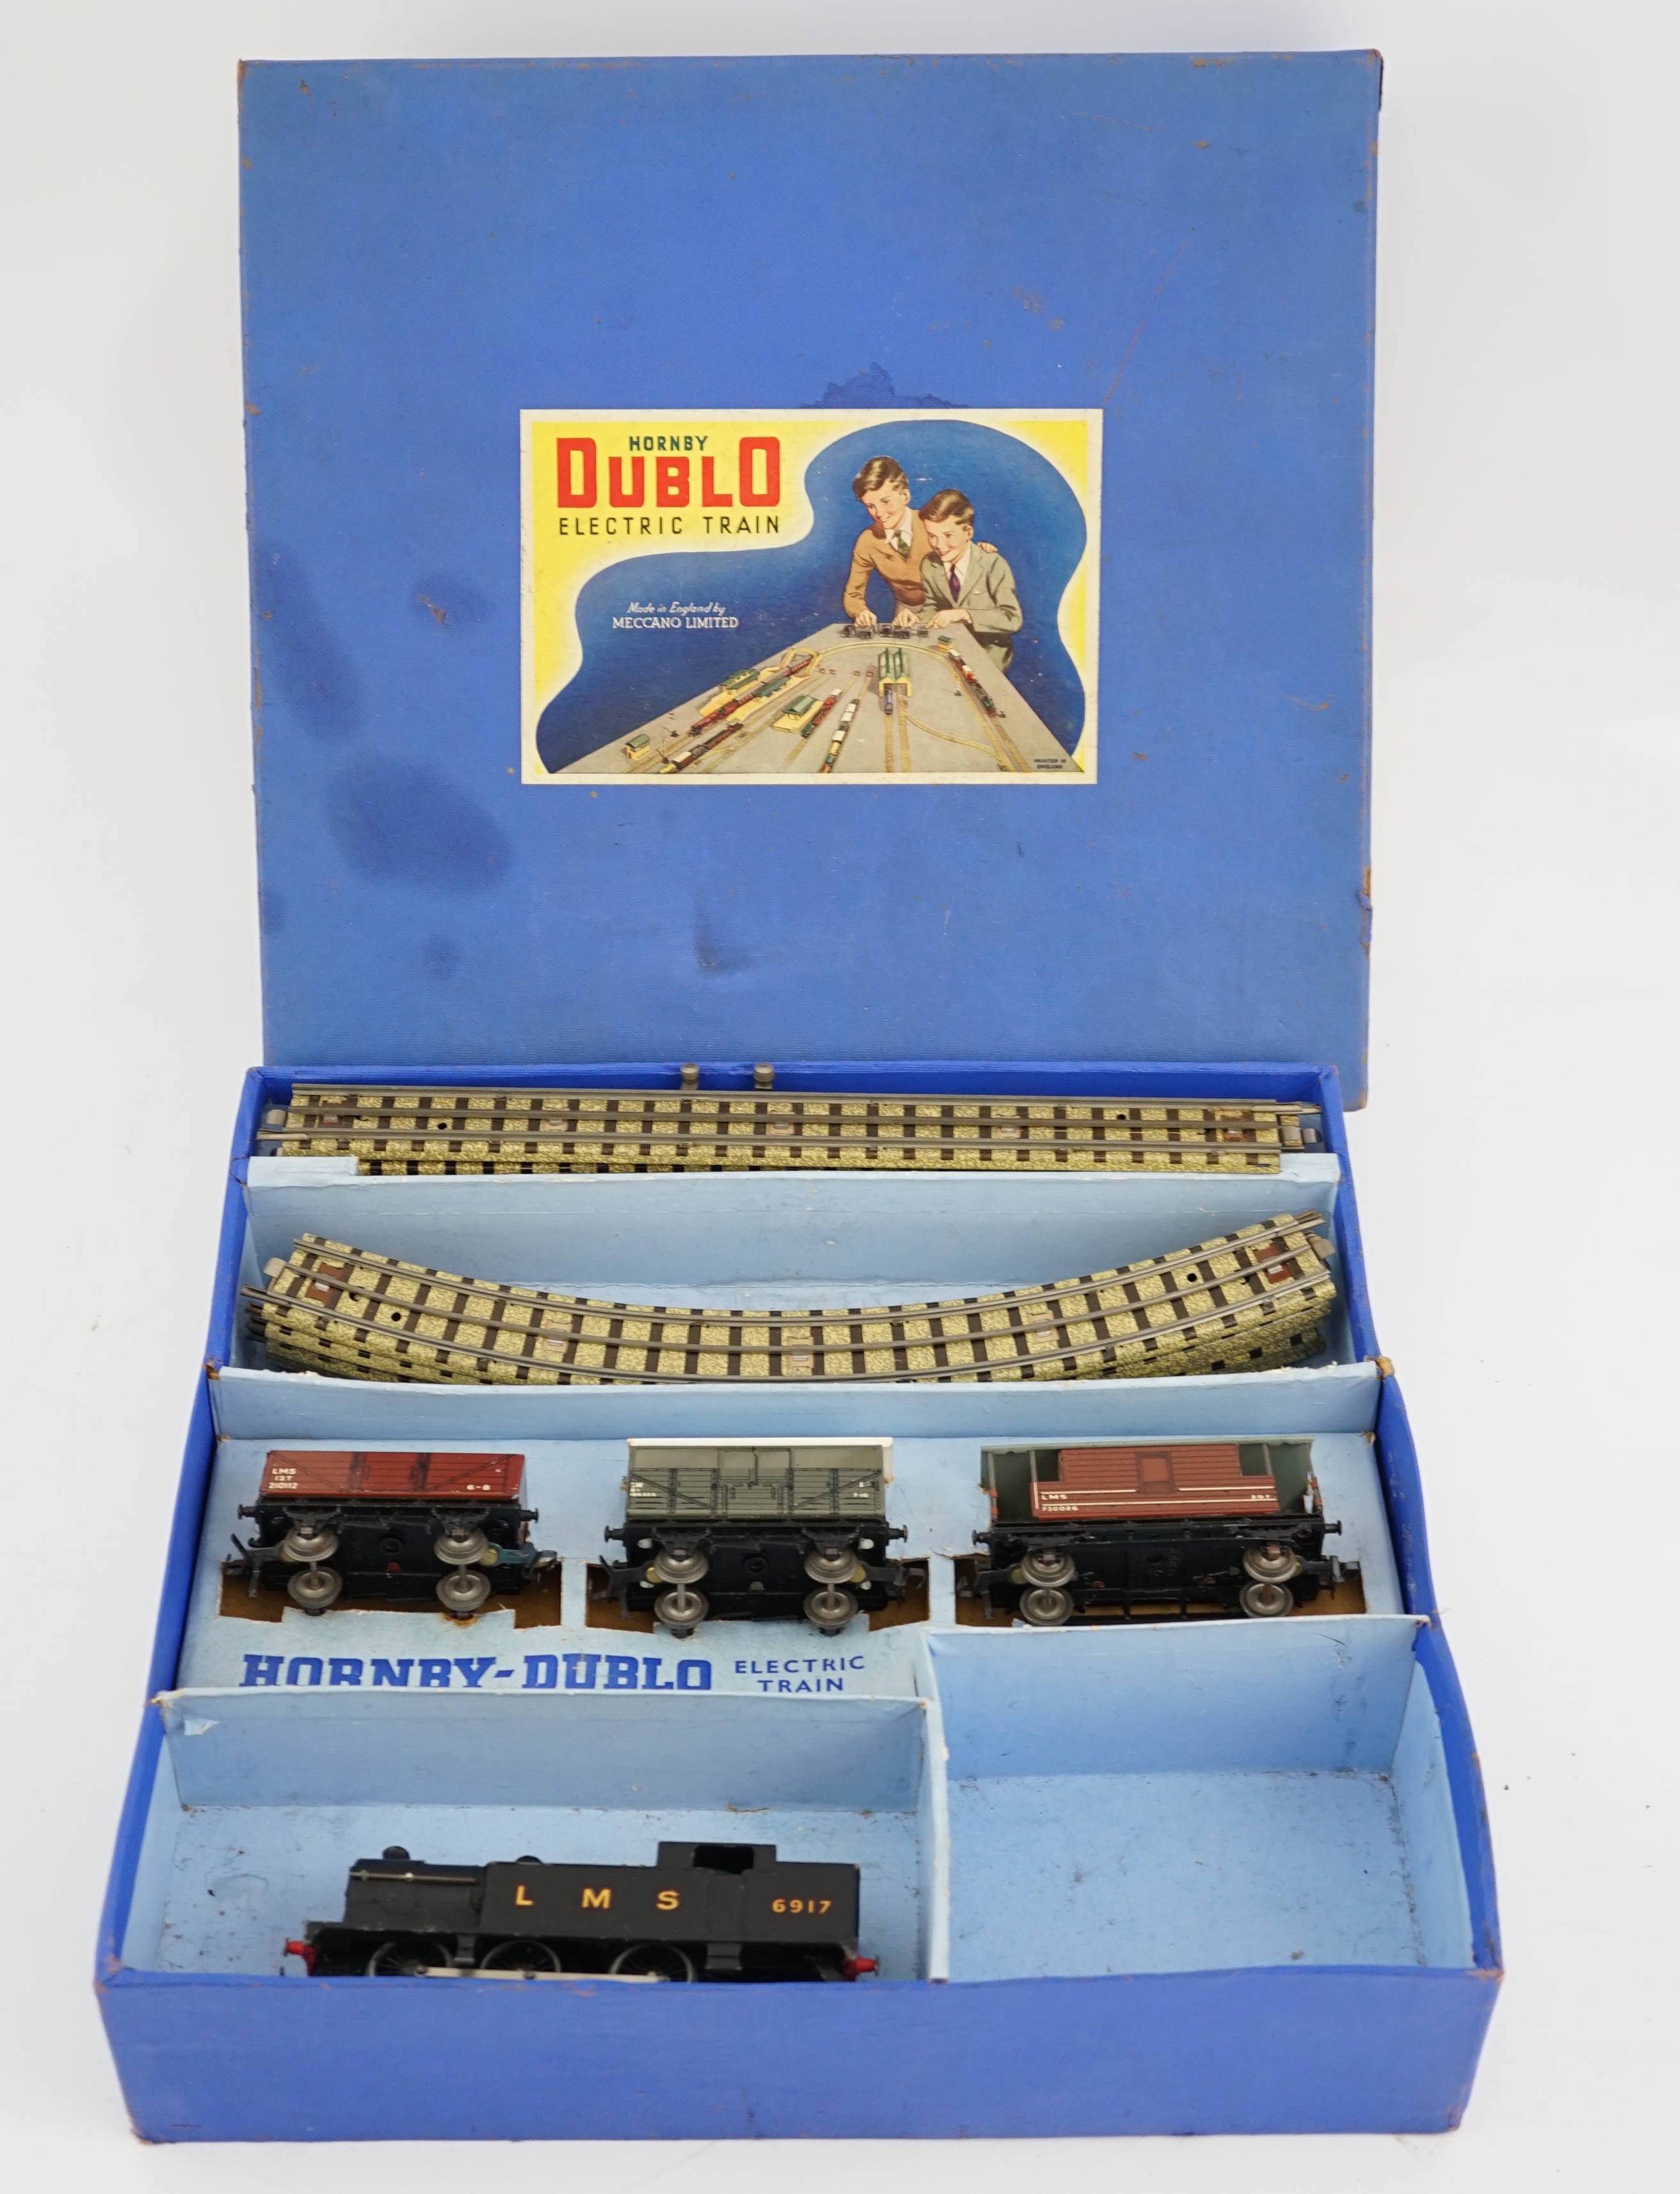 A collection of Hornby Dublo railway for 3-rail running, including; a boxed EDG7 Tank Goods Train set comprising an LMS Class N2 0-6-2 locomotive, 6917, freight wagons and track sections